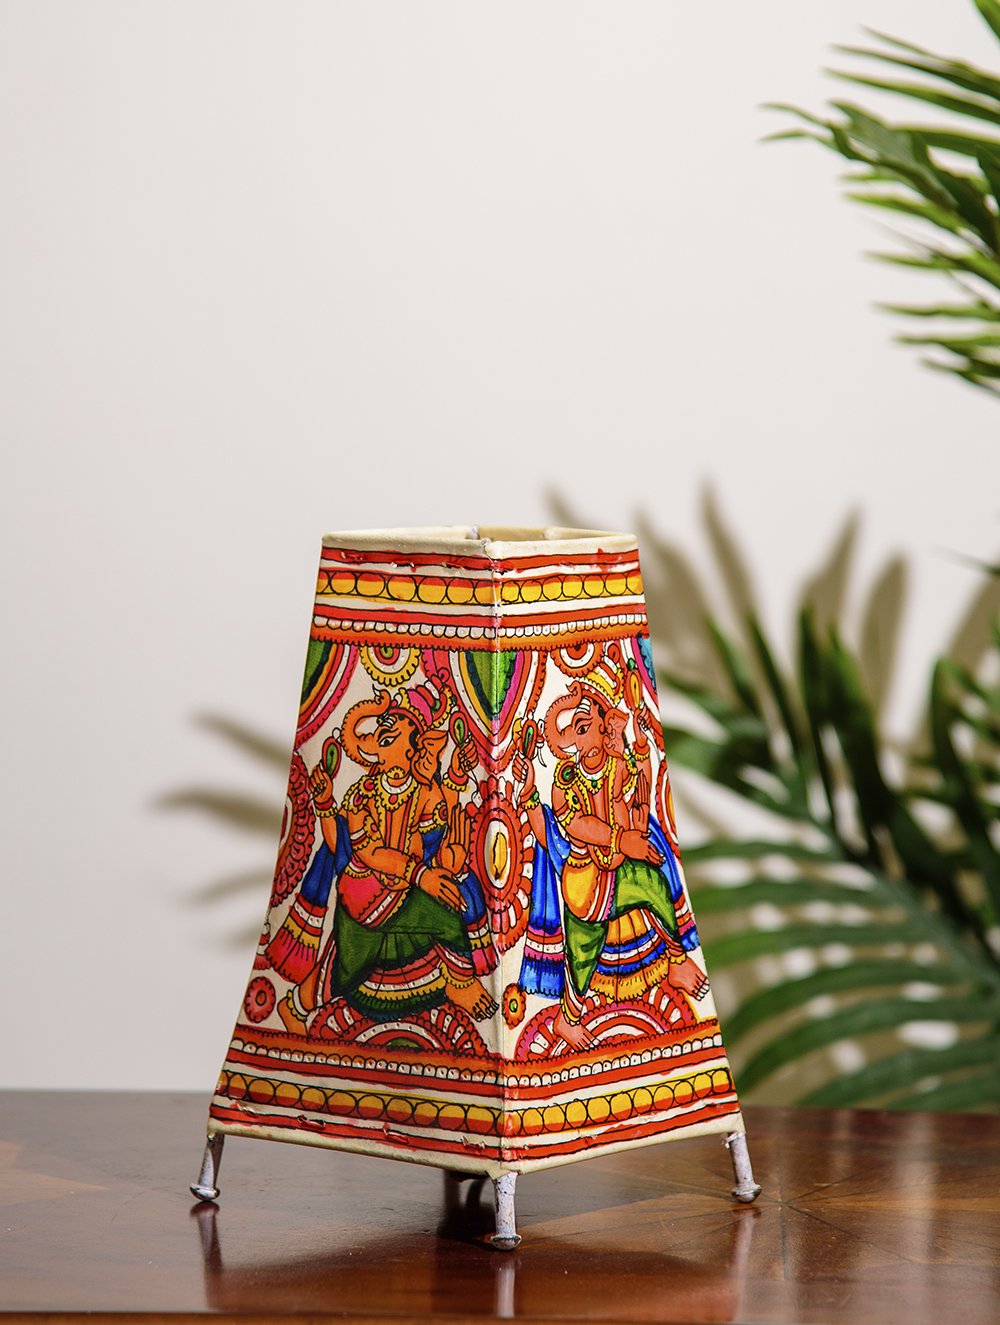 Load image into Gallery viewer, The India Craft House Andhra Multicoloured Painted Leather Table Lamp Shade - Ganesha